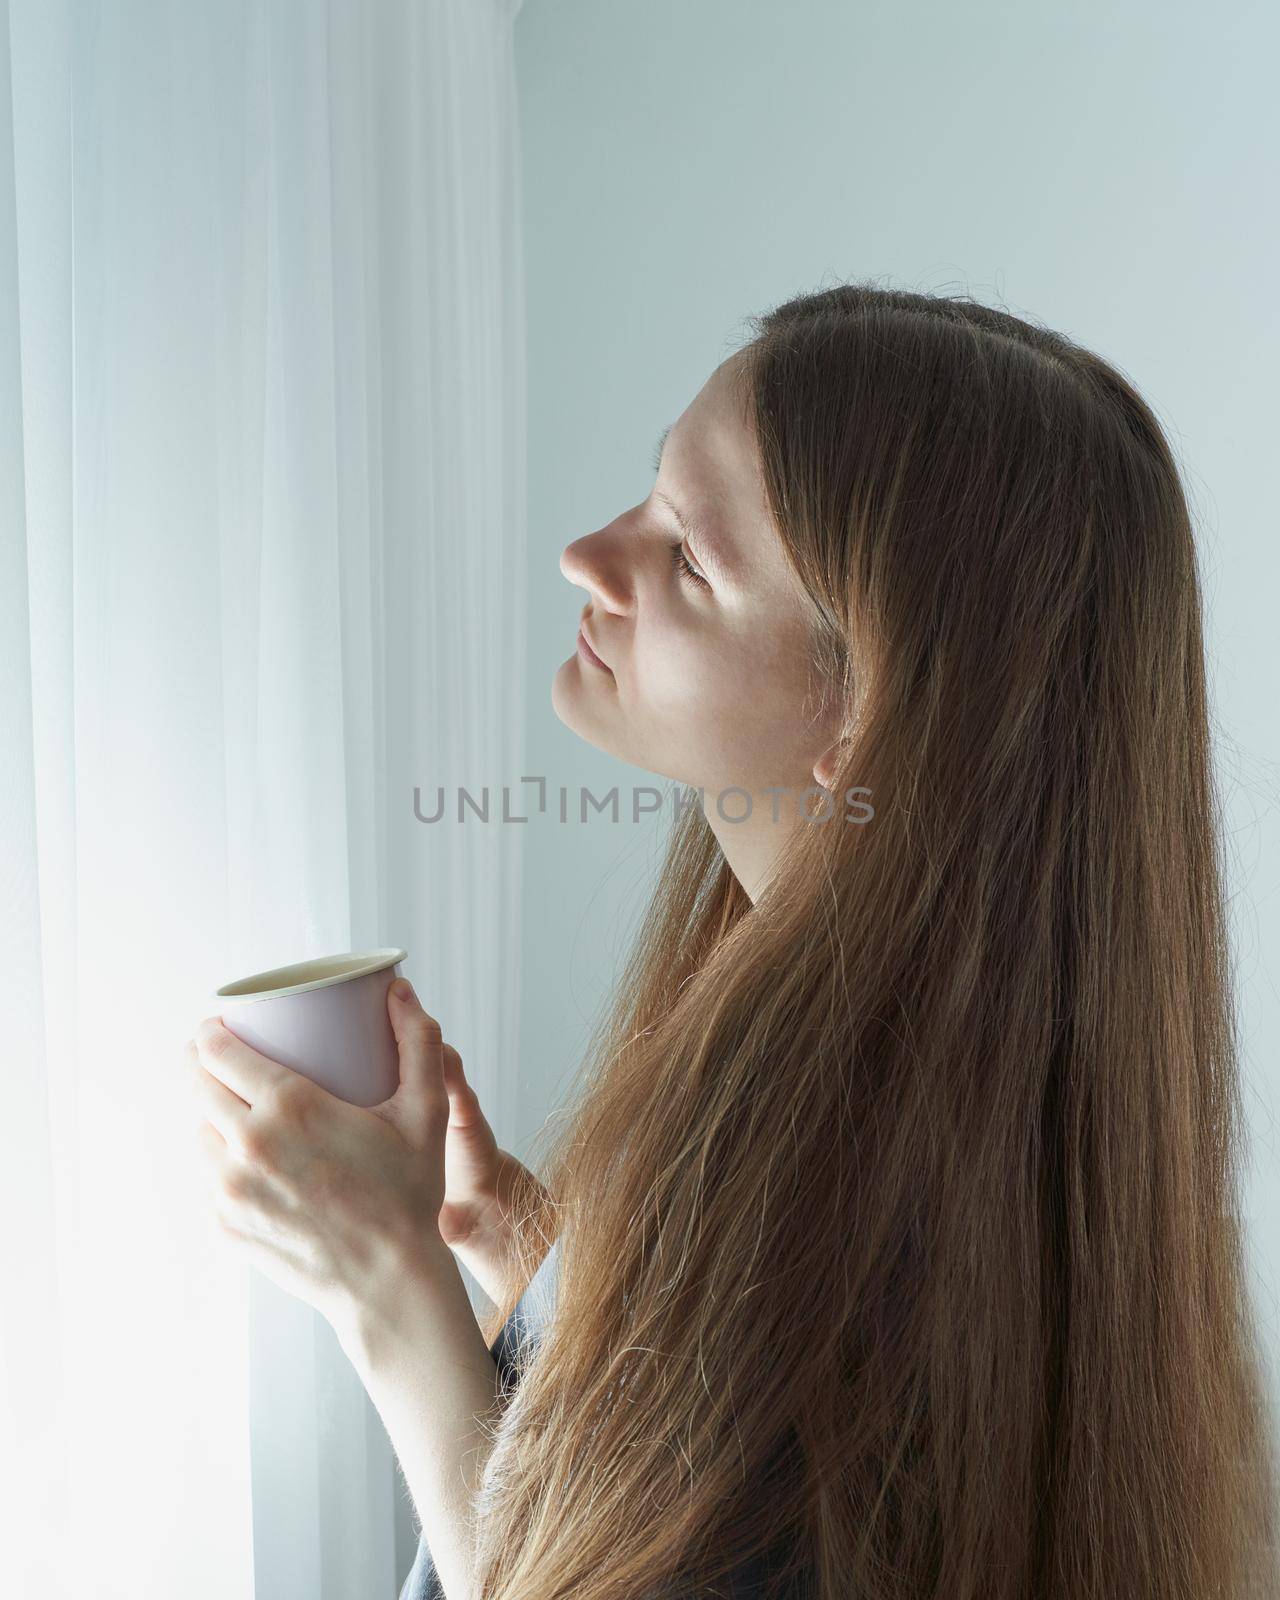 Social media, digital detox. Quarantine, self-isolation, sociophobia. Beautiful girl thoughtfully looks out window. Woman with long hair is deep in thought.